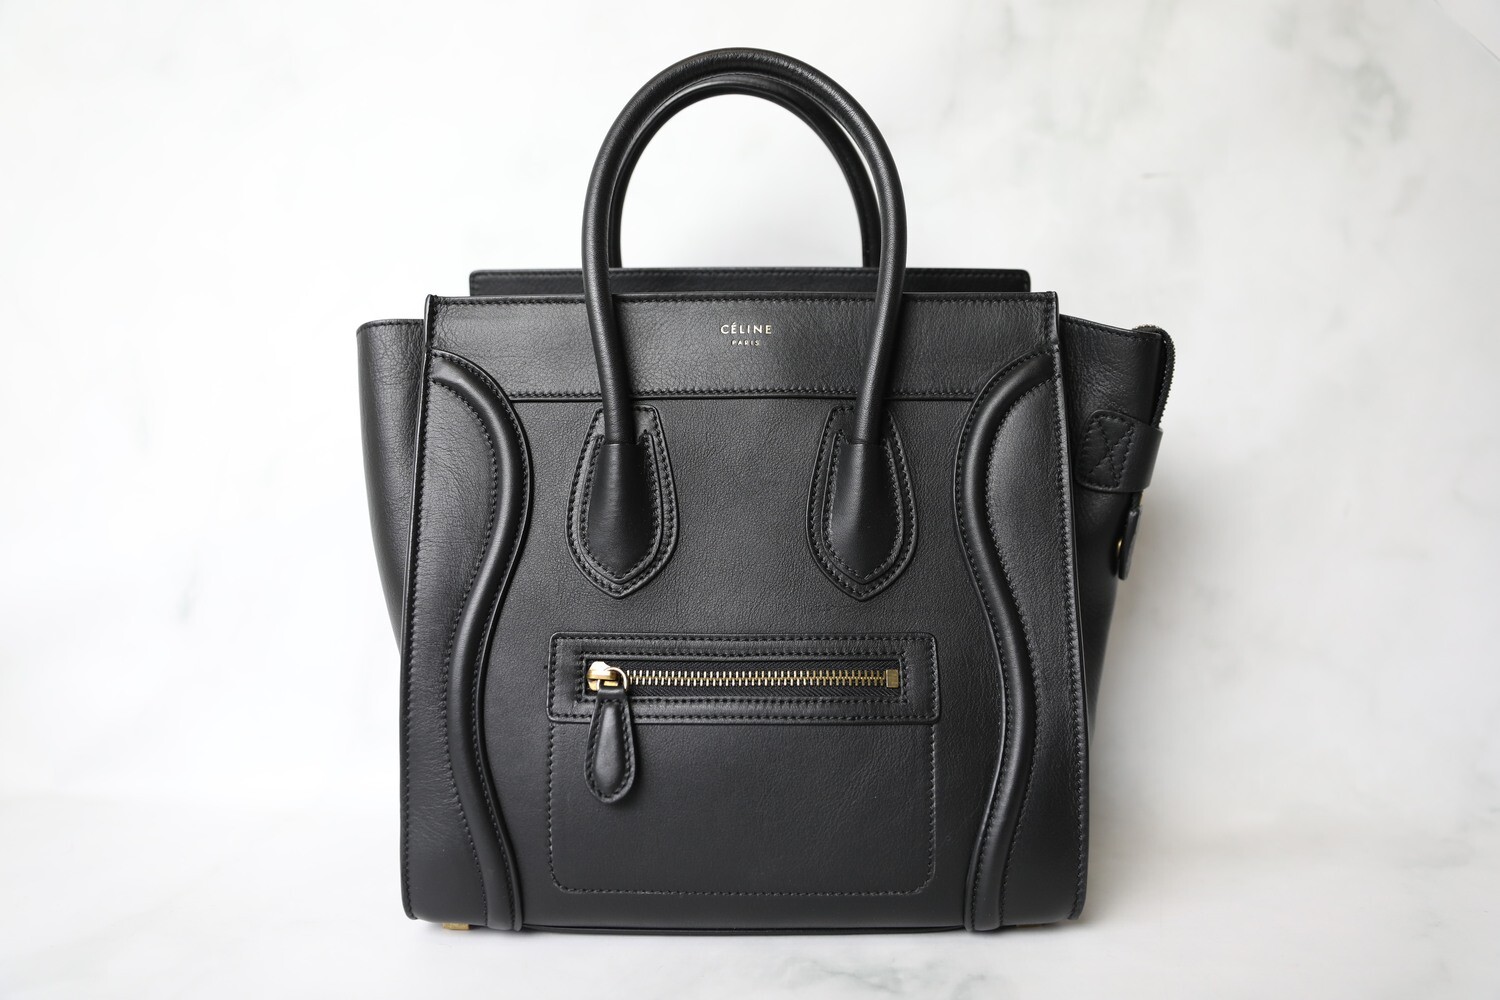 Celine Luggage Micro, Black Smooth Leather with Gold Hardware, Preowned no Dustbag WA001